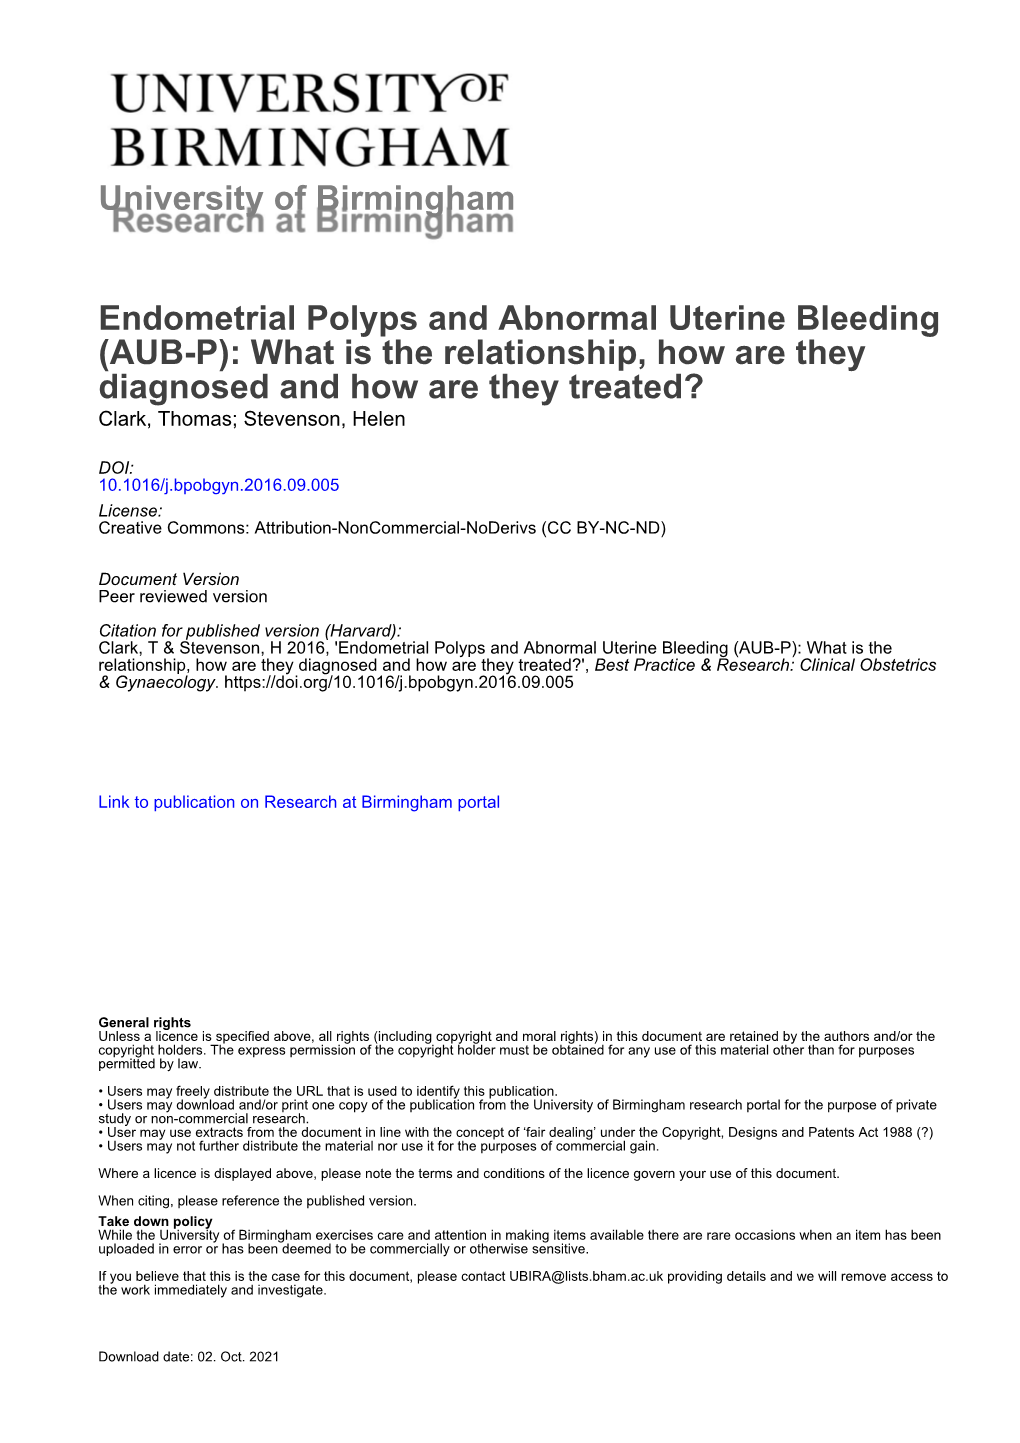 Endometrial Polyps and Abnormal Uterine Bleeding (AUB-P): What Is the Relationship, How Are They Diagnosed and How Are They Treated? Clark, Thomas; Stevenson, Helen